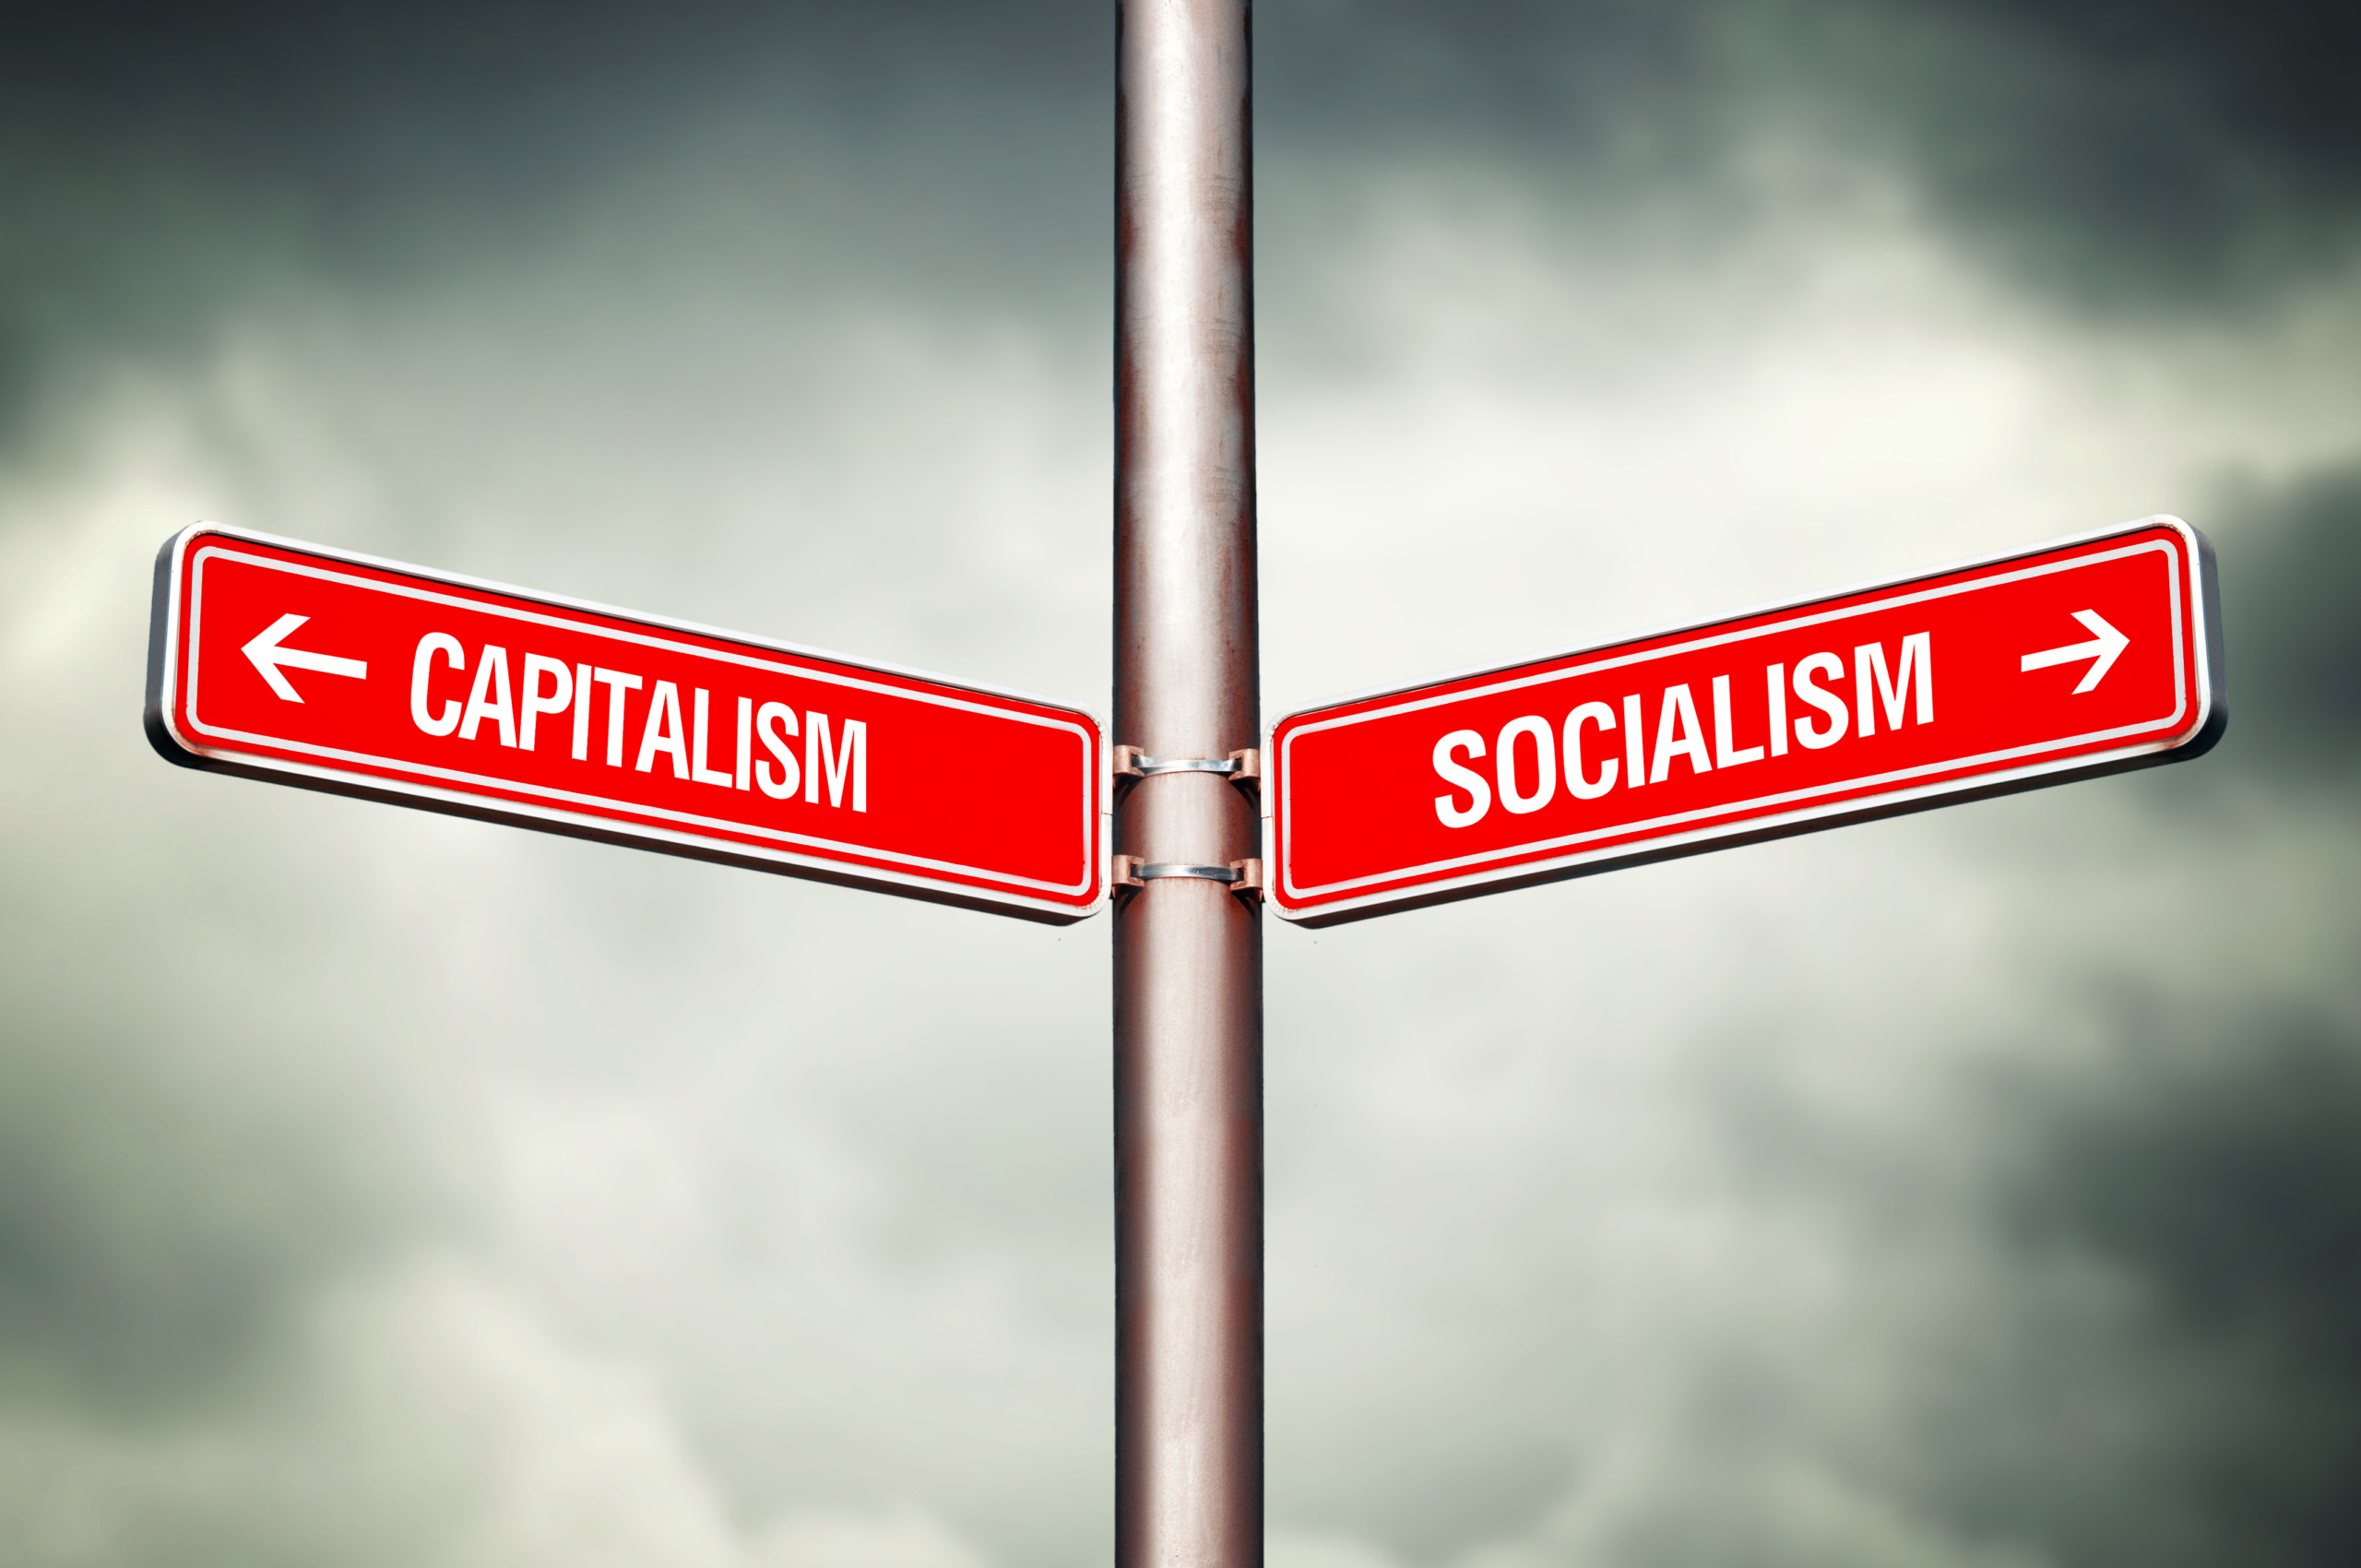 Capitalism or Socialism concept